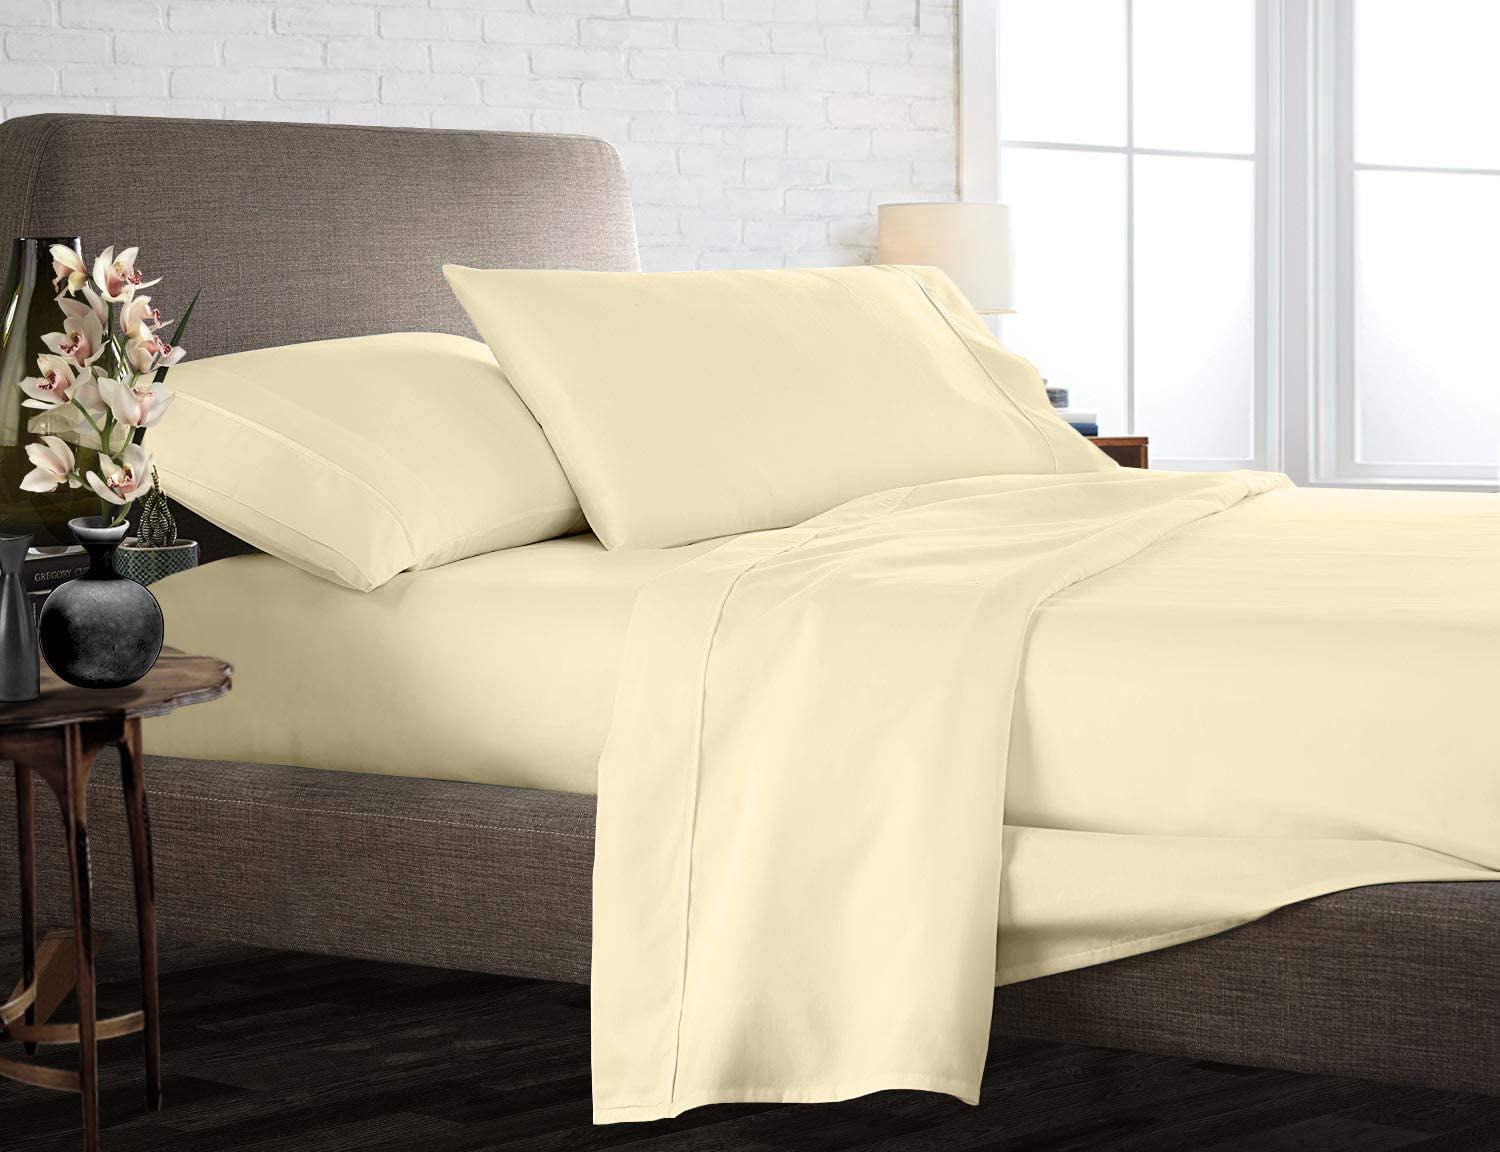 100% Percale Cotton 4pc Pillow Bed Sheet Set Beige/Ivory 800 Tc Extra Deep